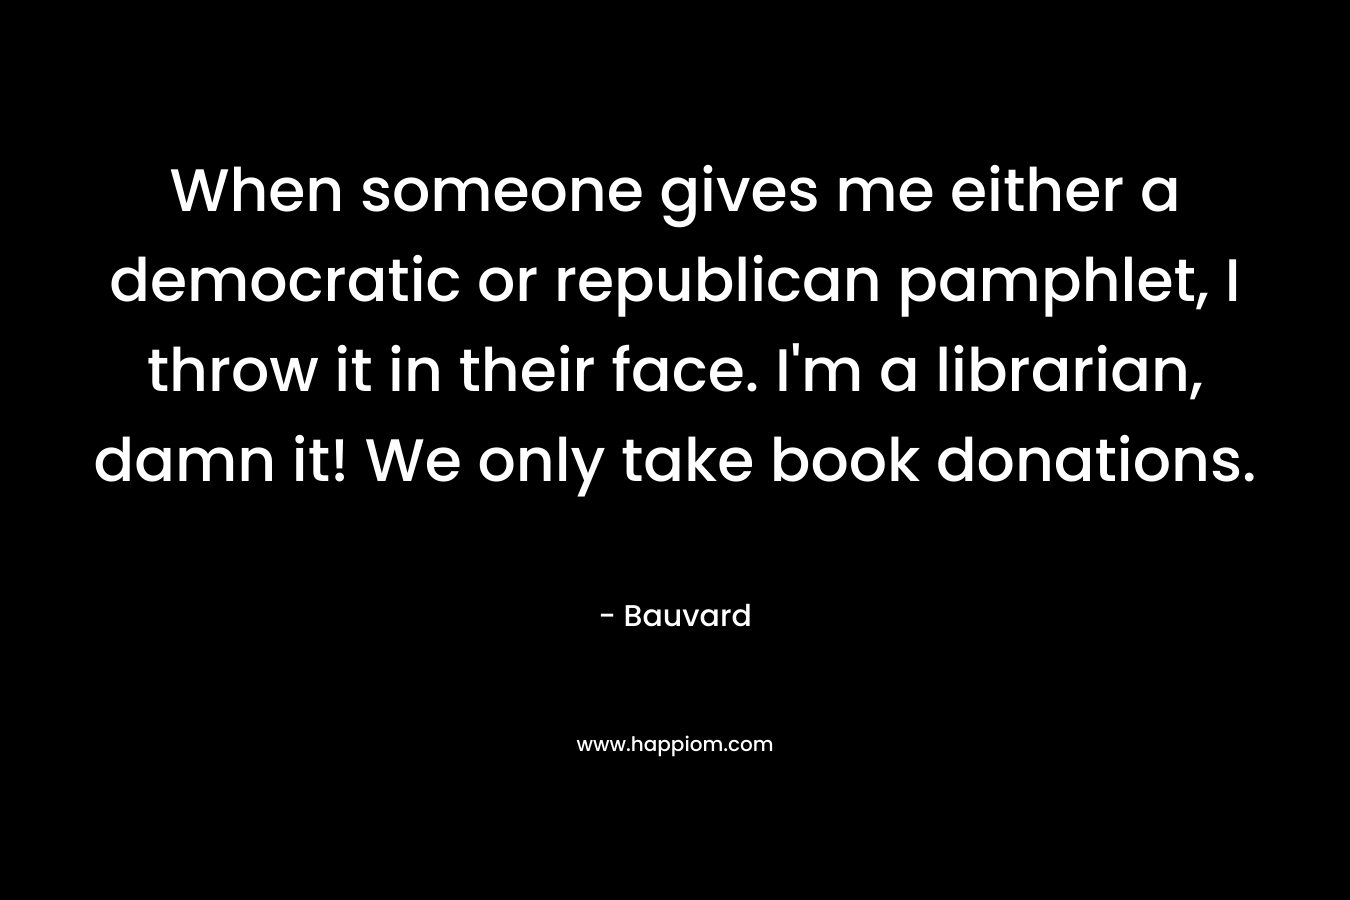 When someone gives me either a democratic or republican pamphlet, I throw it in their face. I’m a librarian, damn it! We only take book donations. – Bauvard